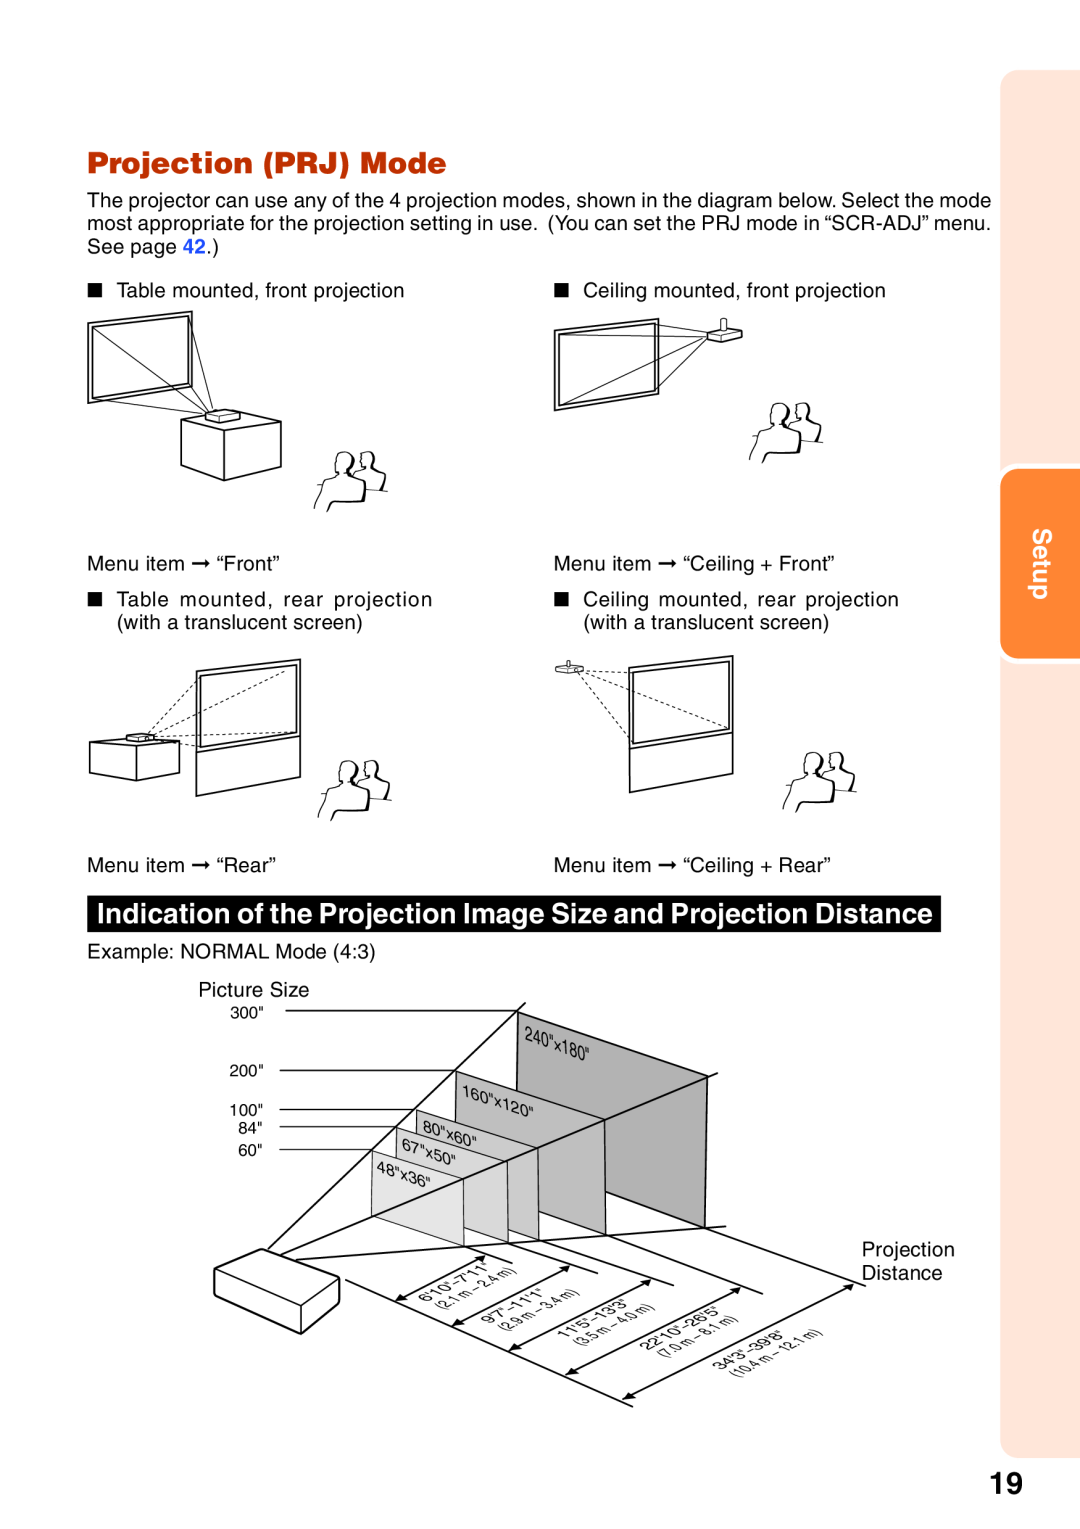 Sharp XG-MB65X operation manual Projection PRJ Mode, Indication of the Projection Image Size and Projection Distance, Setup 